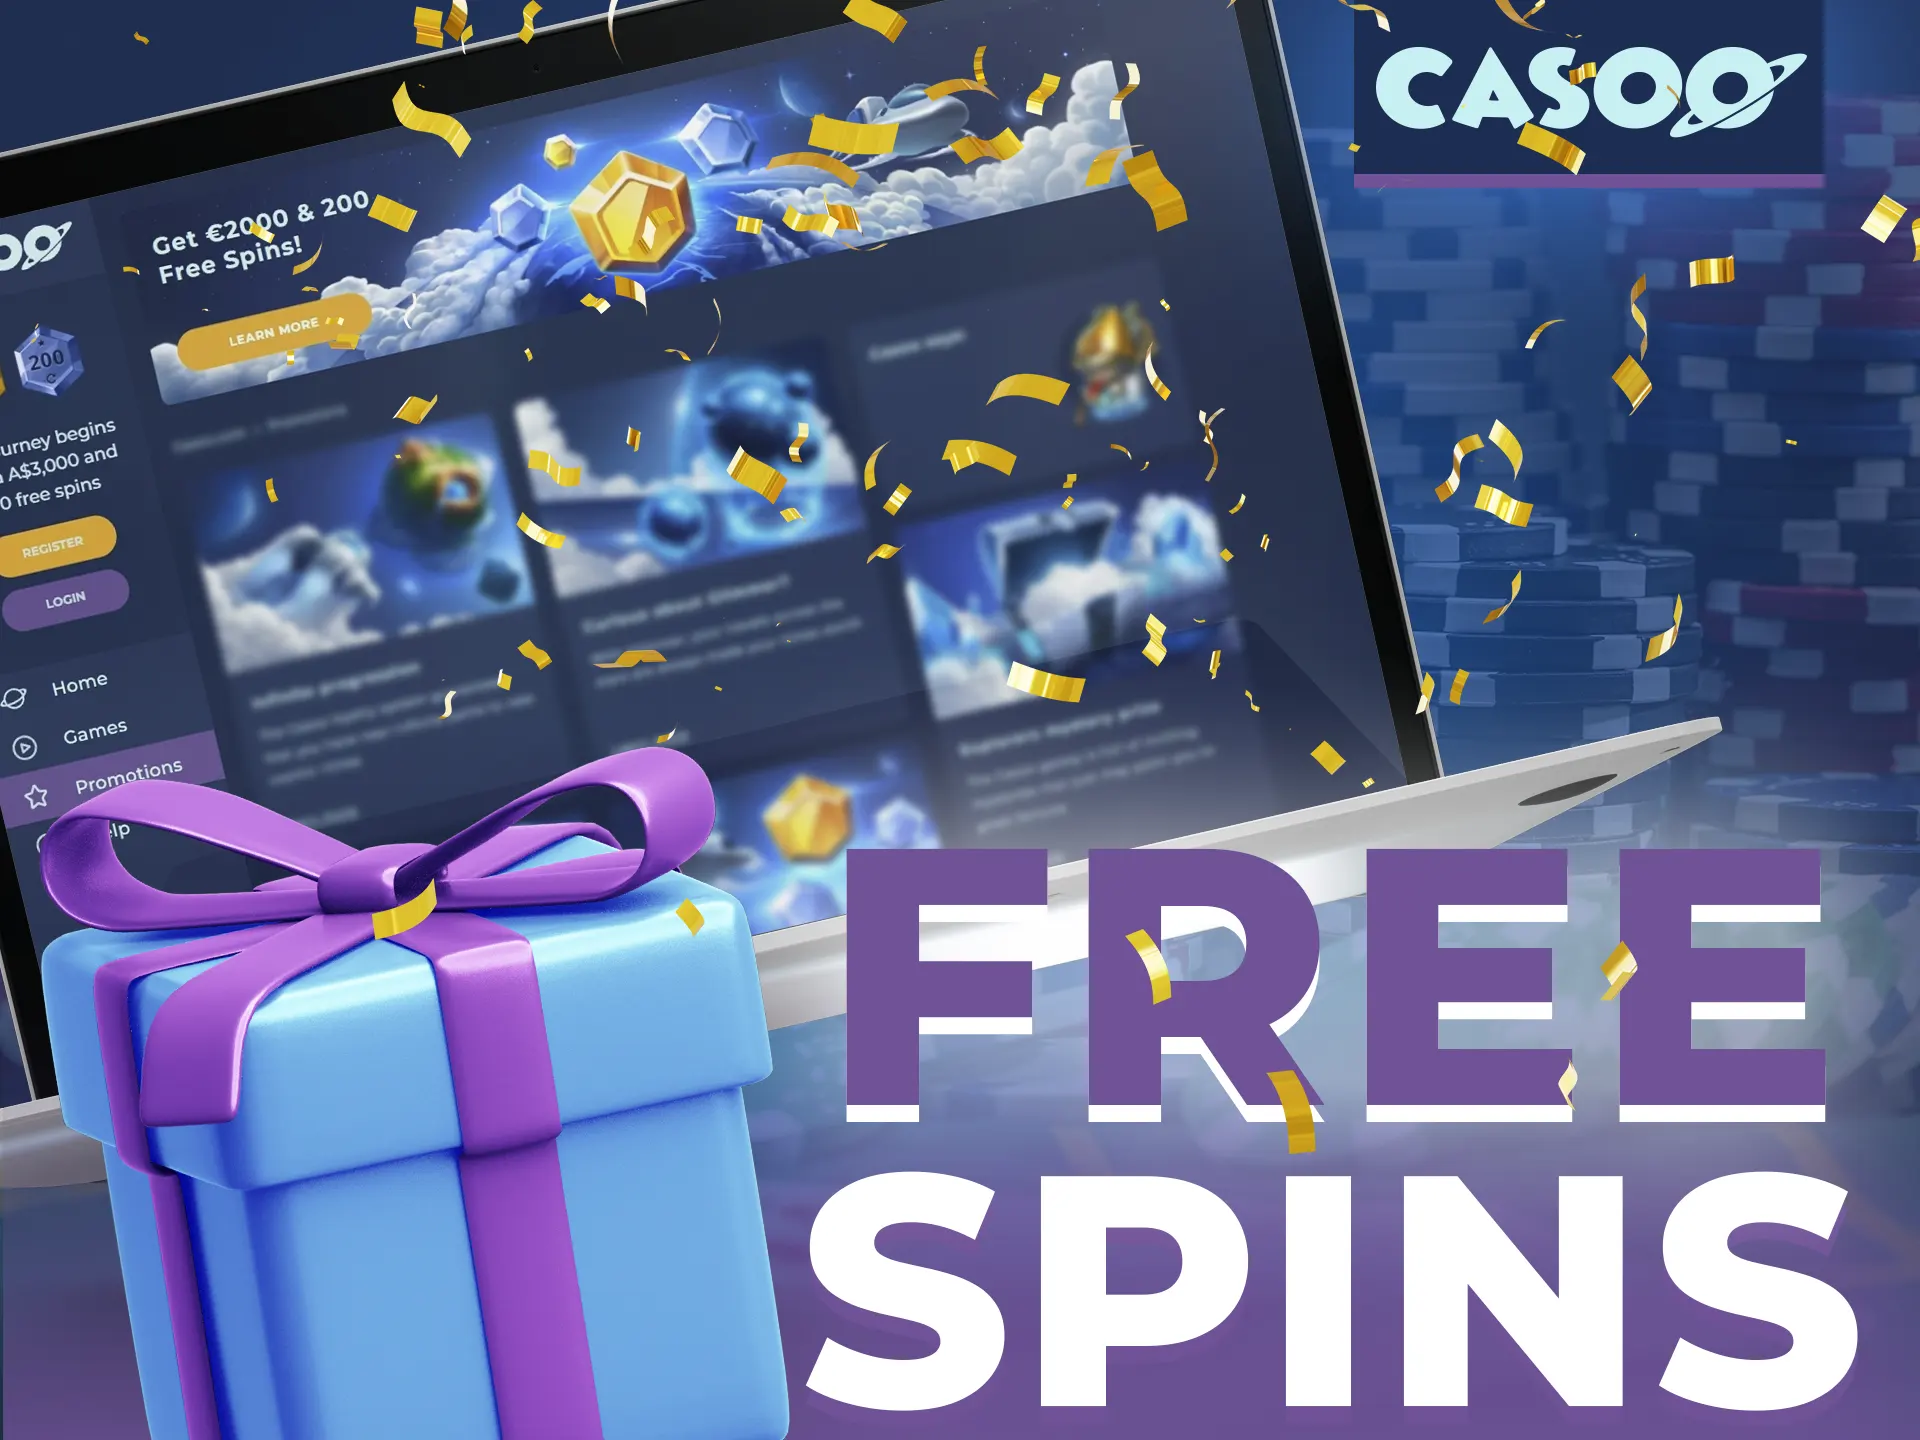 You can get free spins with welcome package.